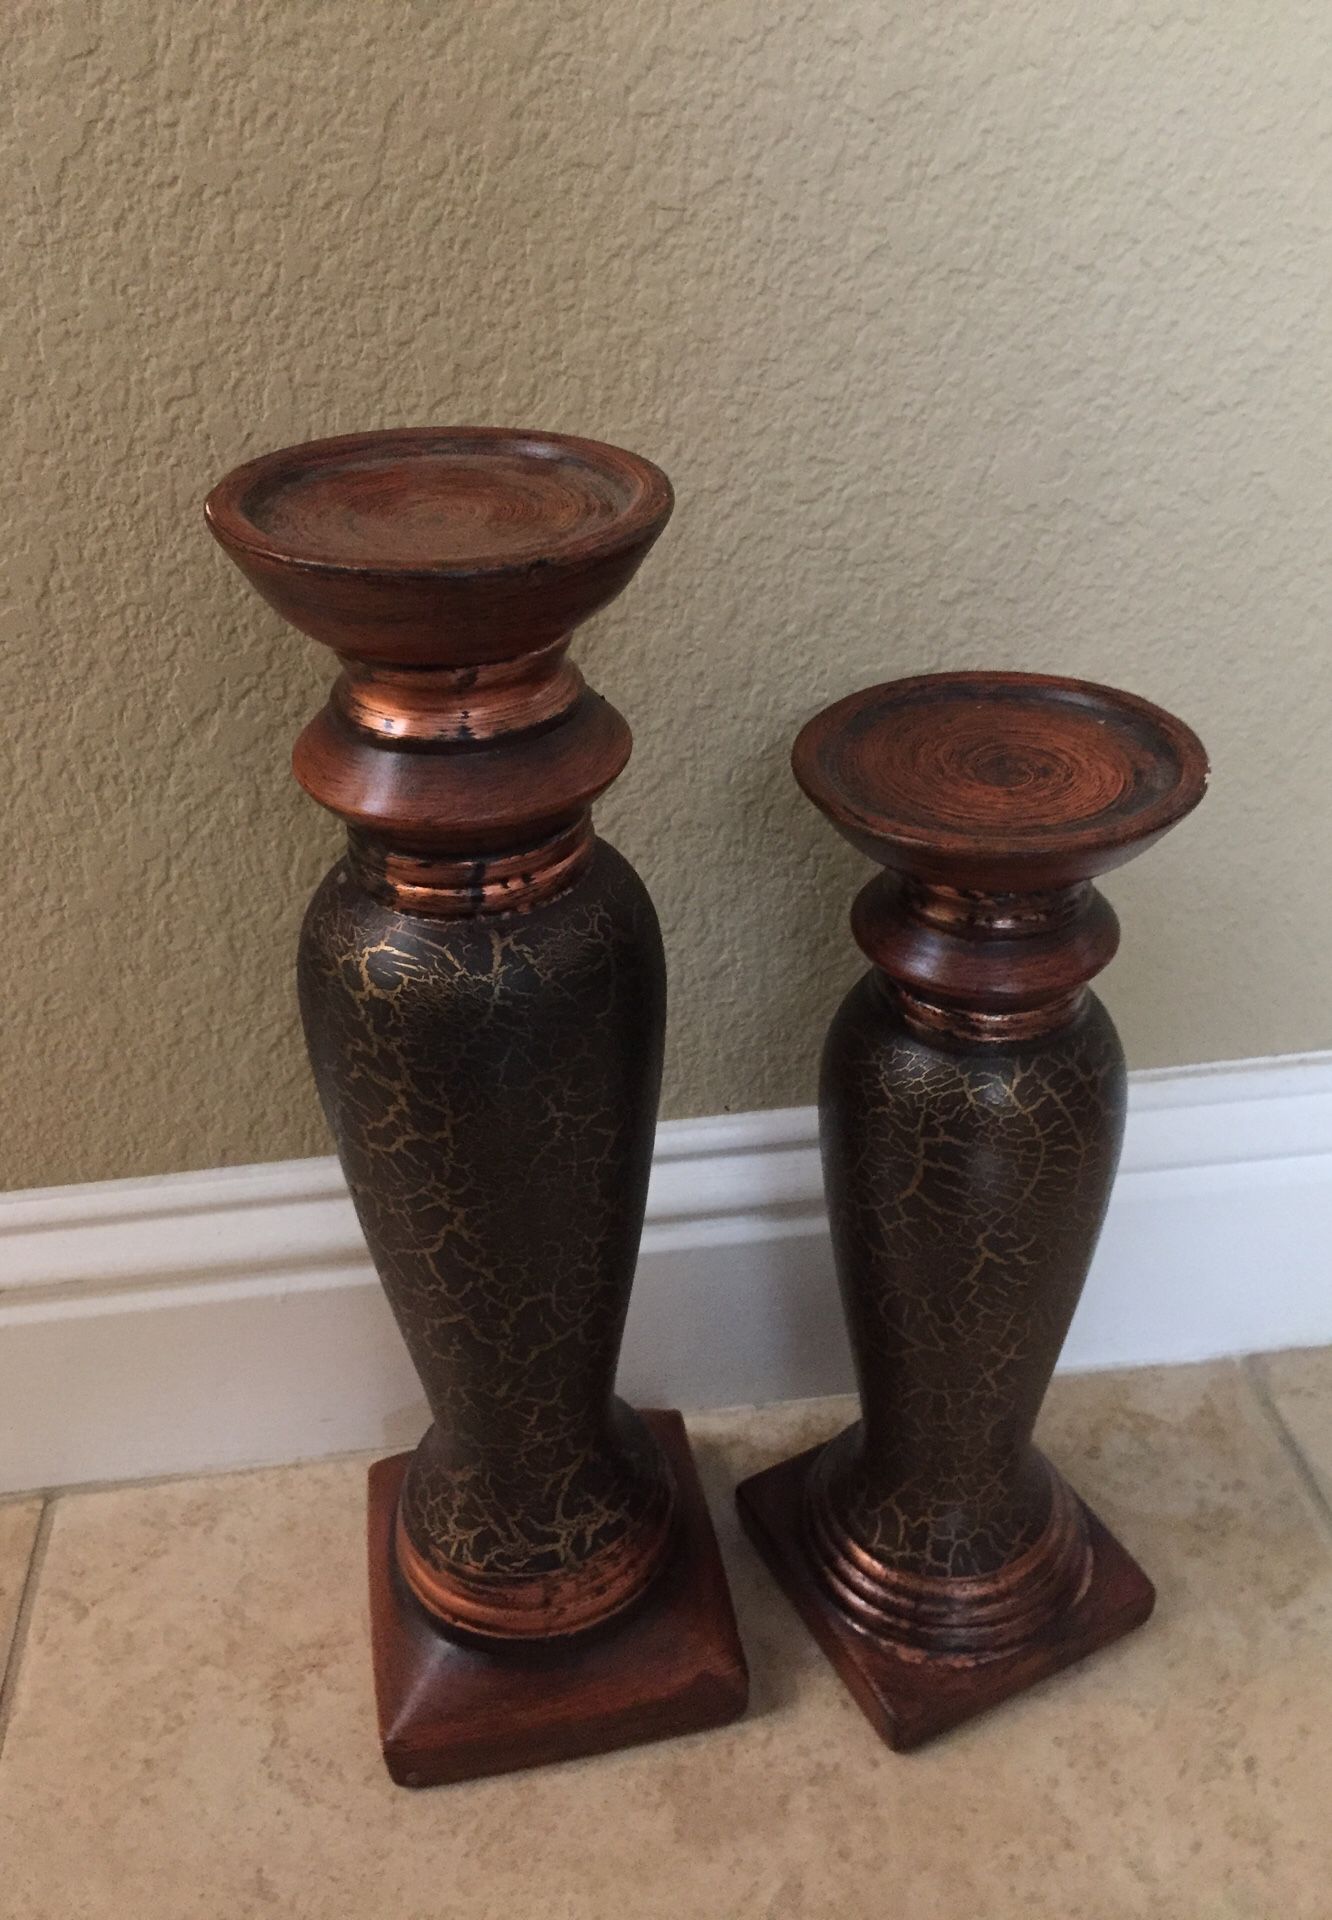 Candle holders.